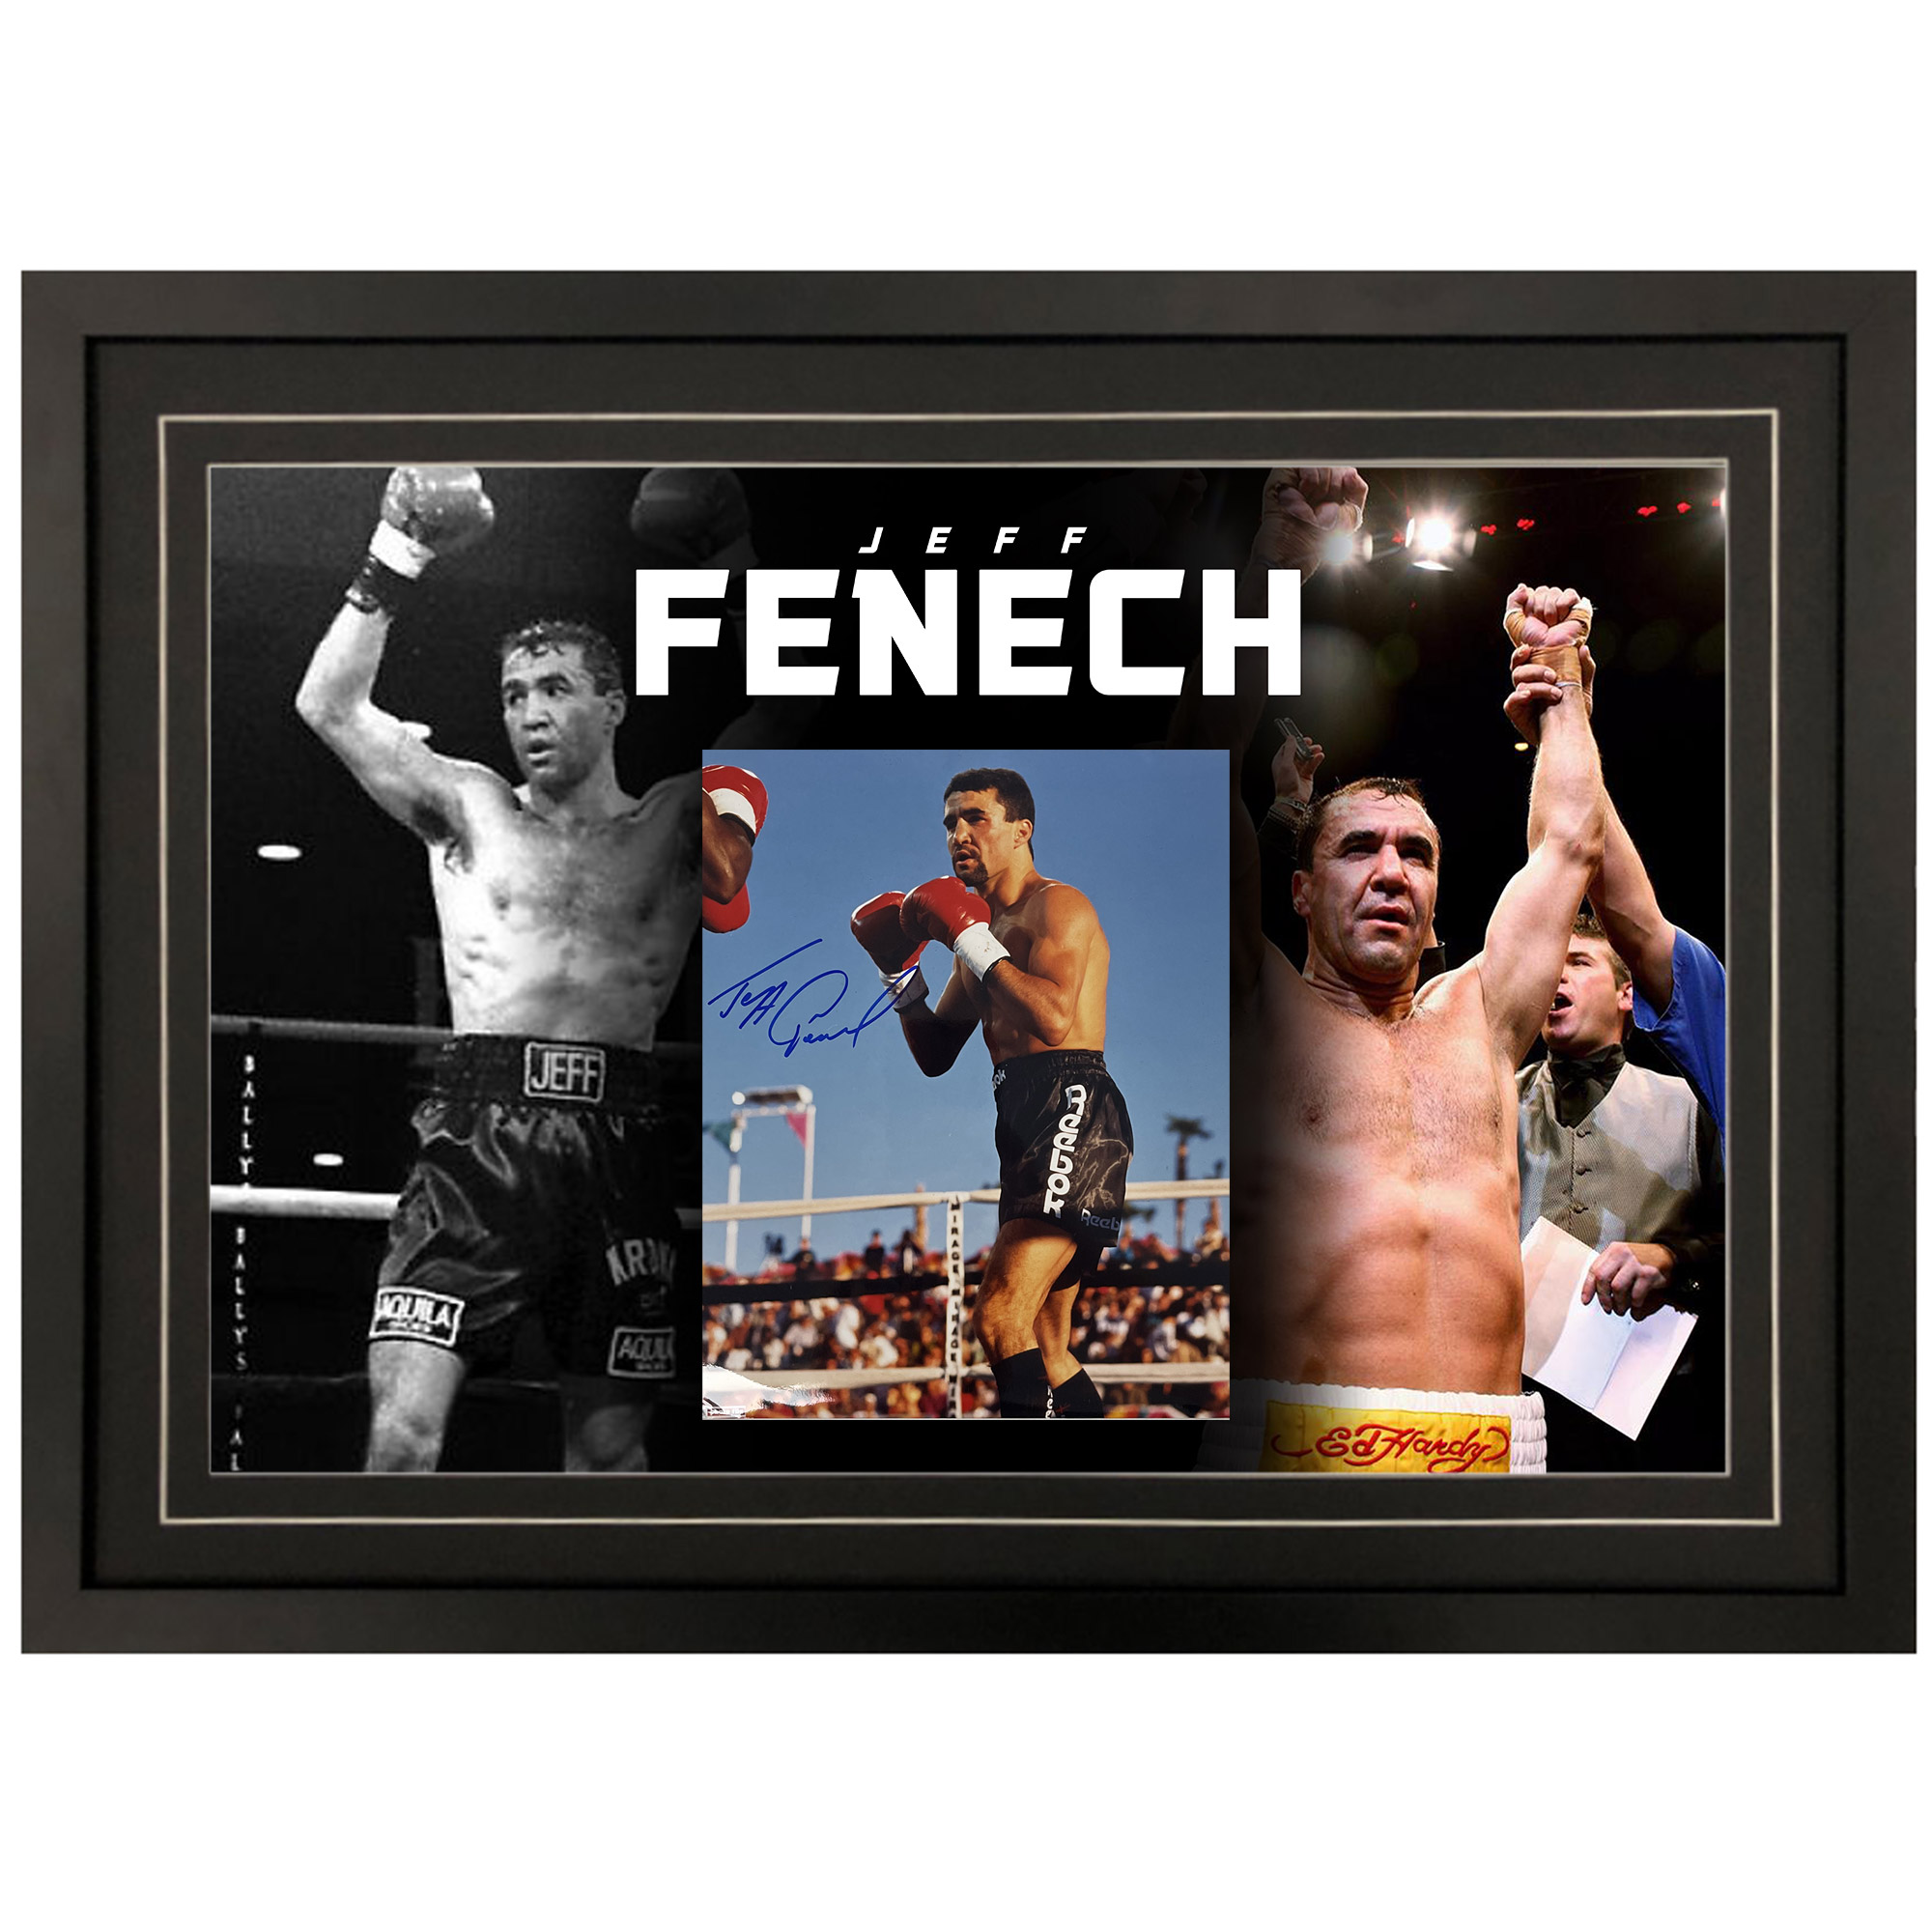 Boxing – Jeff Fenech Signed & Framed Photograph #2